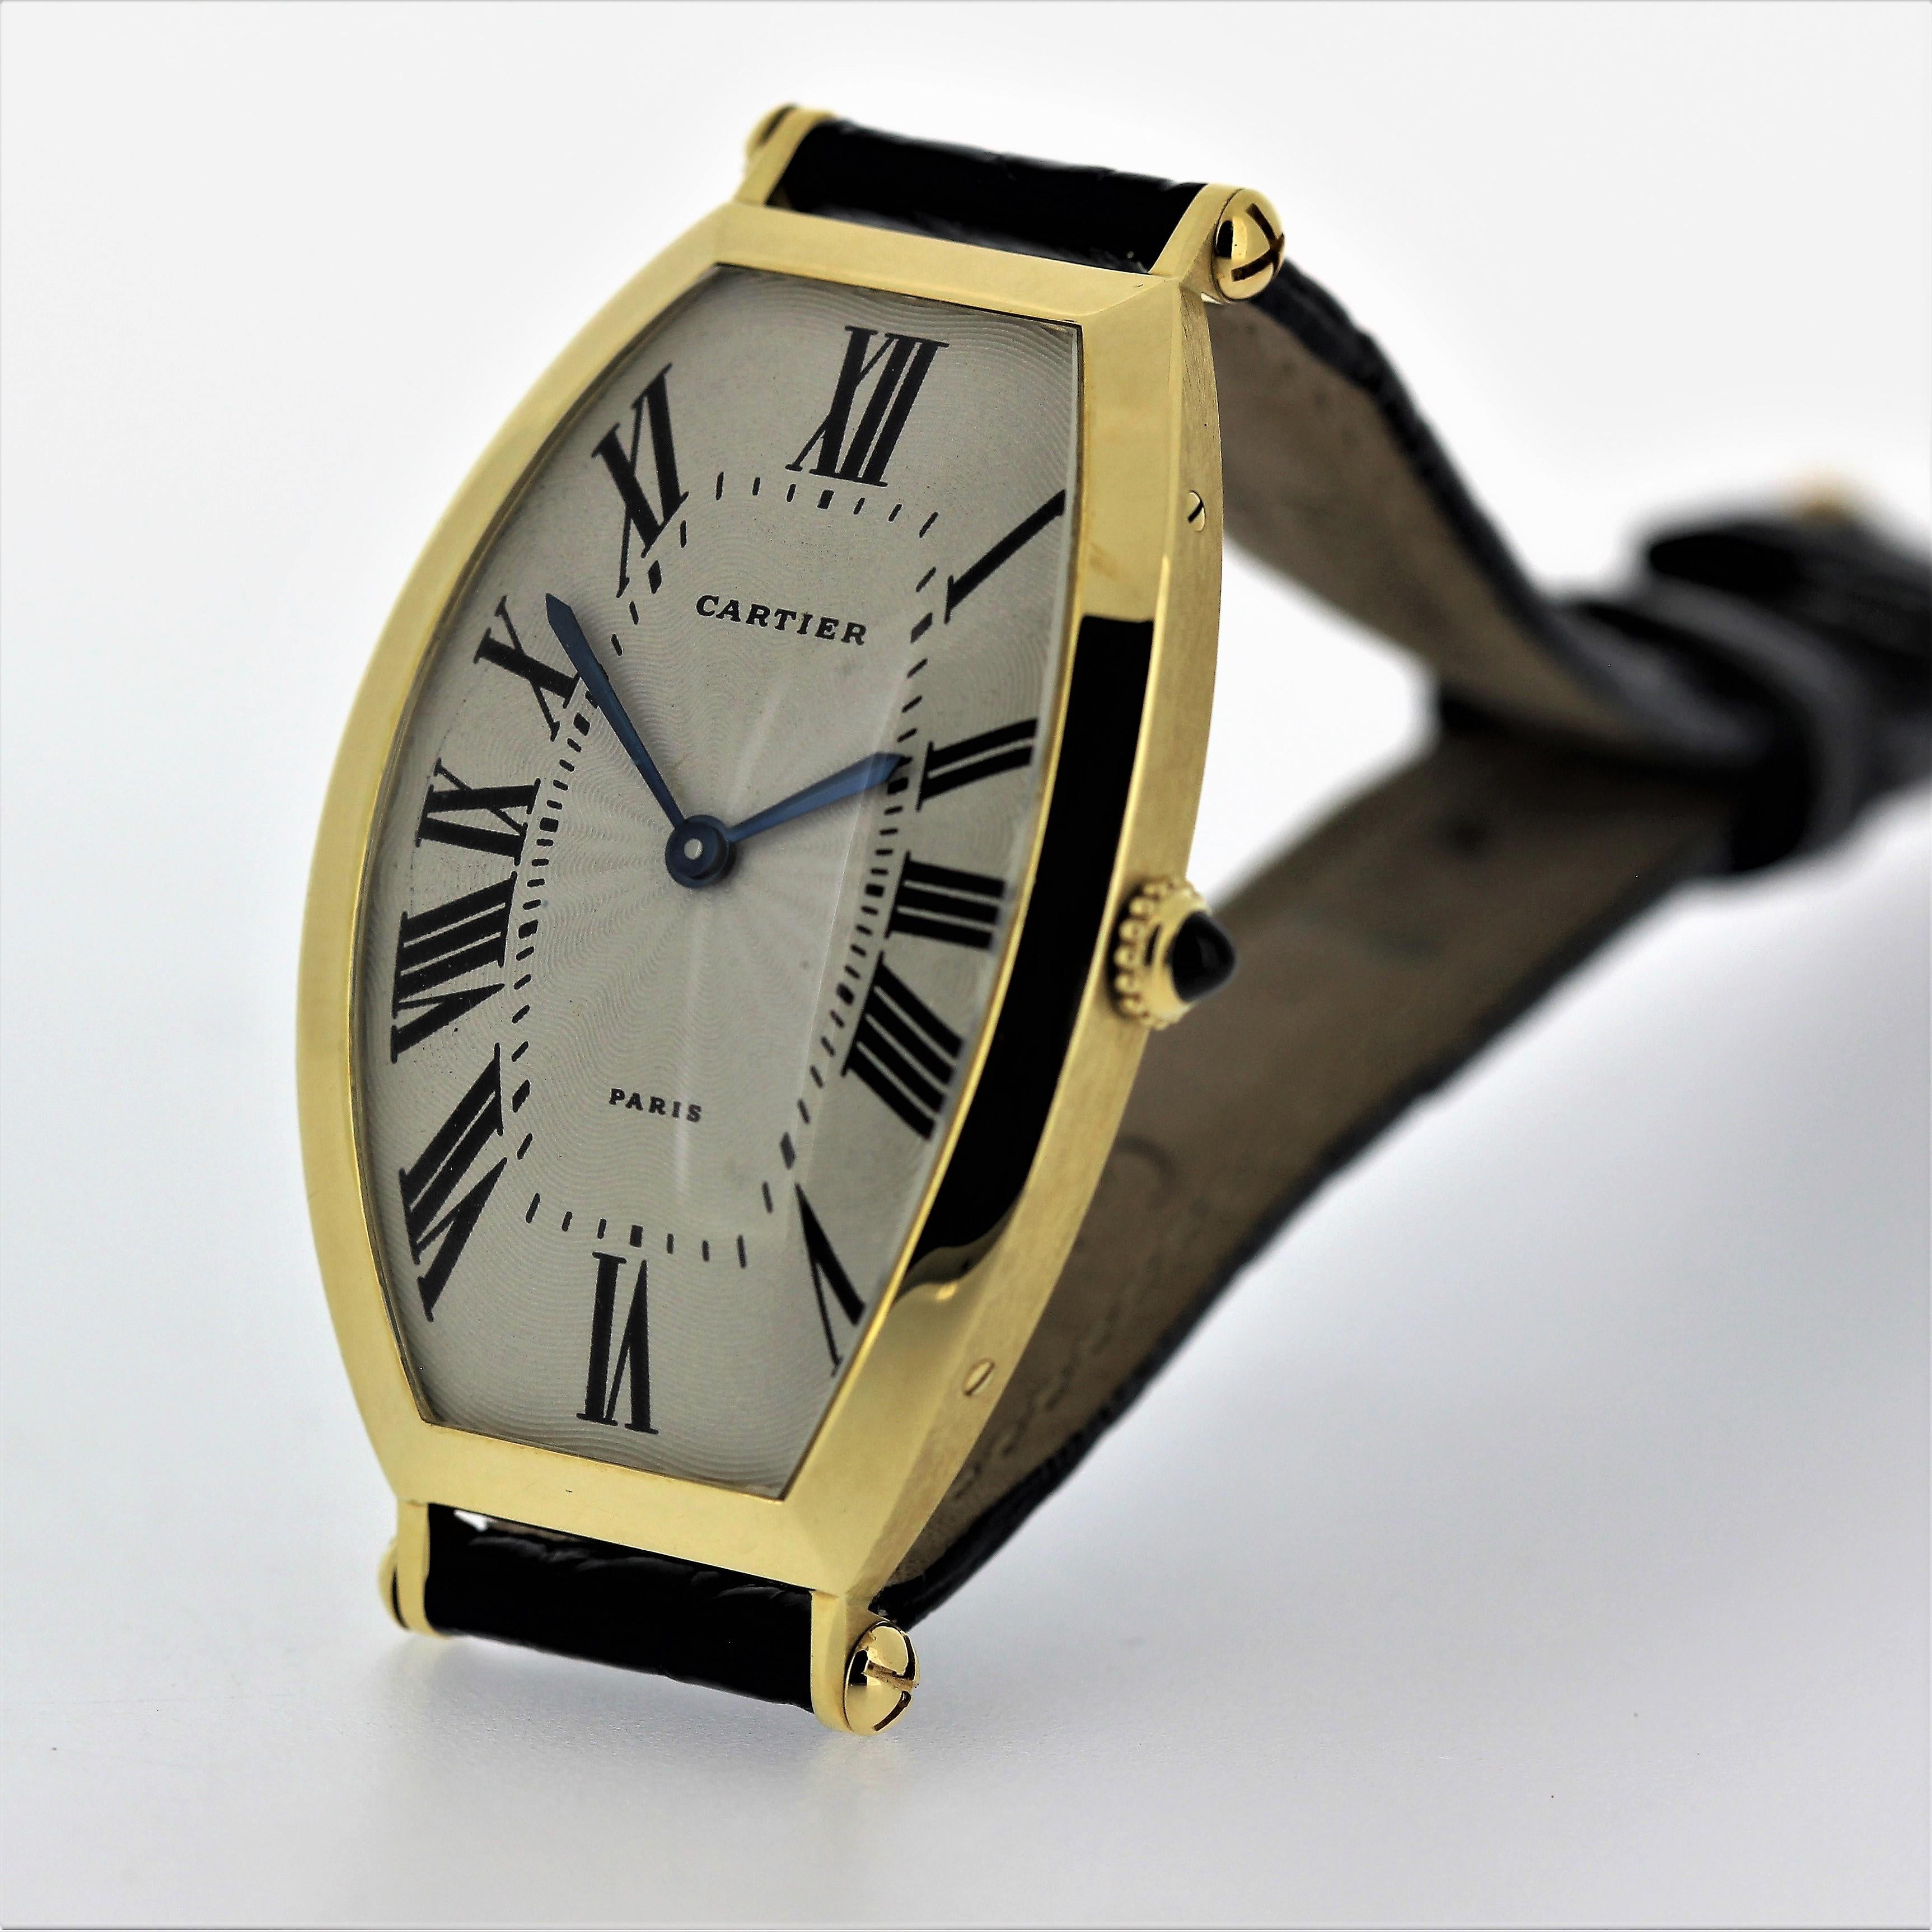 Introduction:
This Vintage Cartier Paris Tonneau watch is the large size, circa 1975-1980.  It is 18K yellow gold and measures 46 x 27mm with mechanical manual movement with 17 jewels.  It has a Cartier crocodile strap and 18K Cartier Buckle.  It is